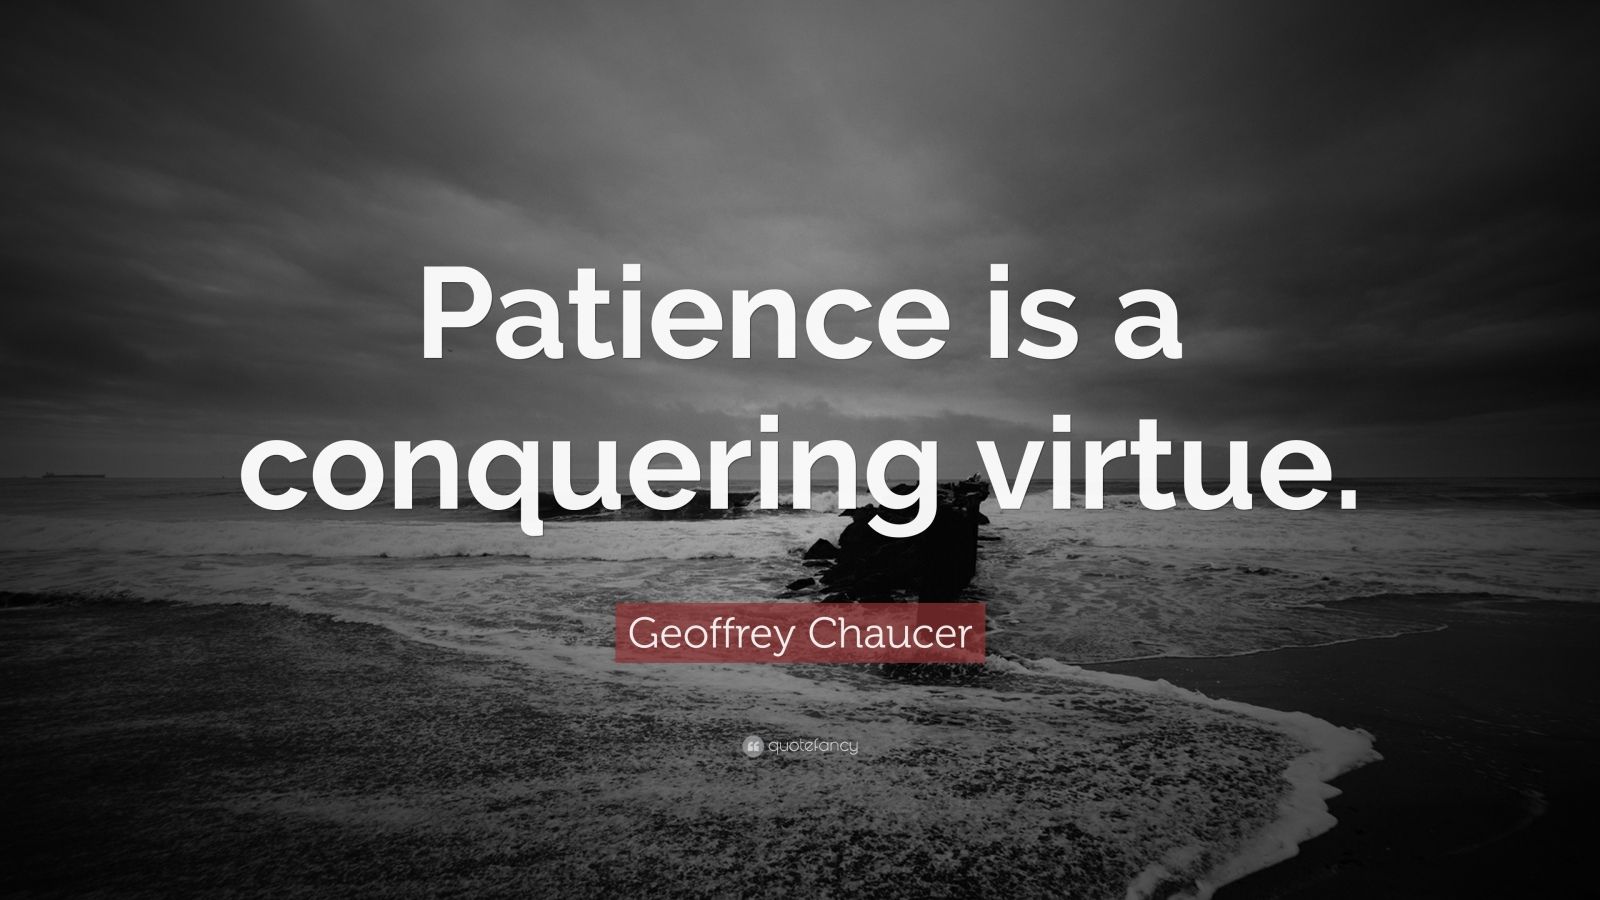 Geoffrey Chaucer Quote: “Patience is a conquering virtue.”